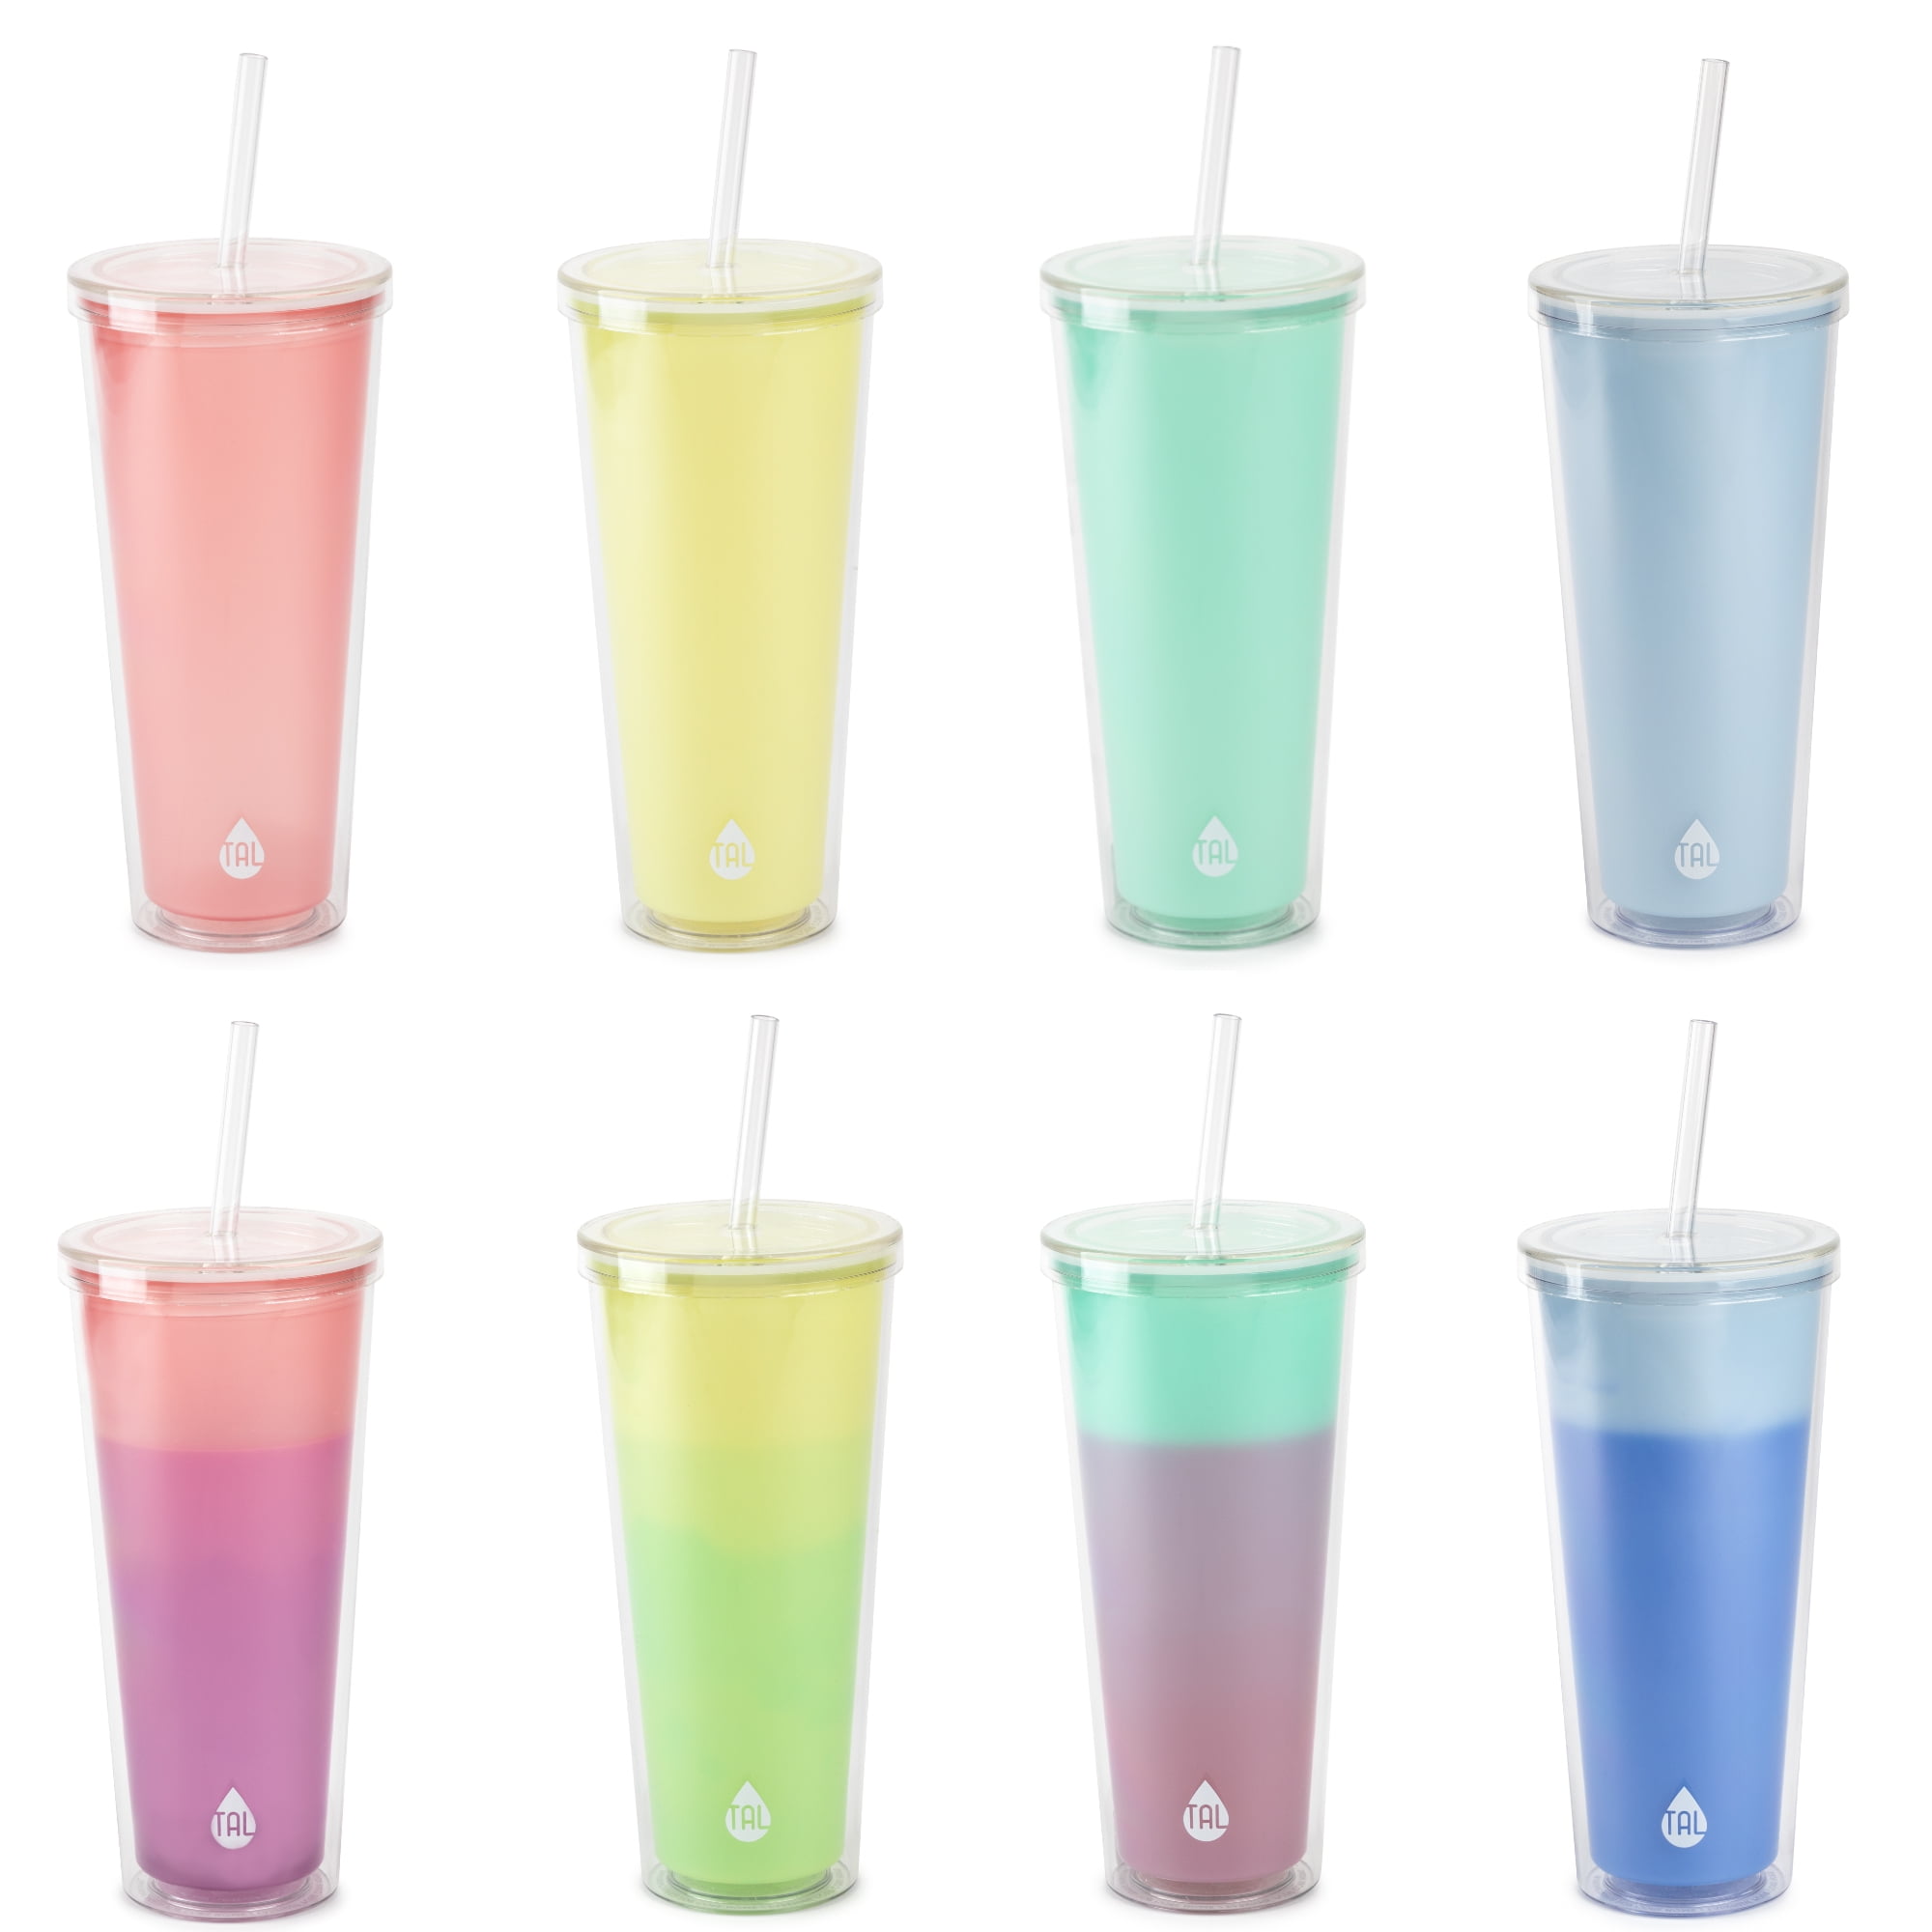 TAL Double Walled Color Changing Tumblers 2 Pack, 24 fl oz, Black